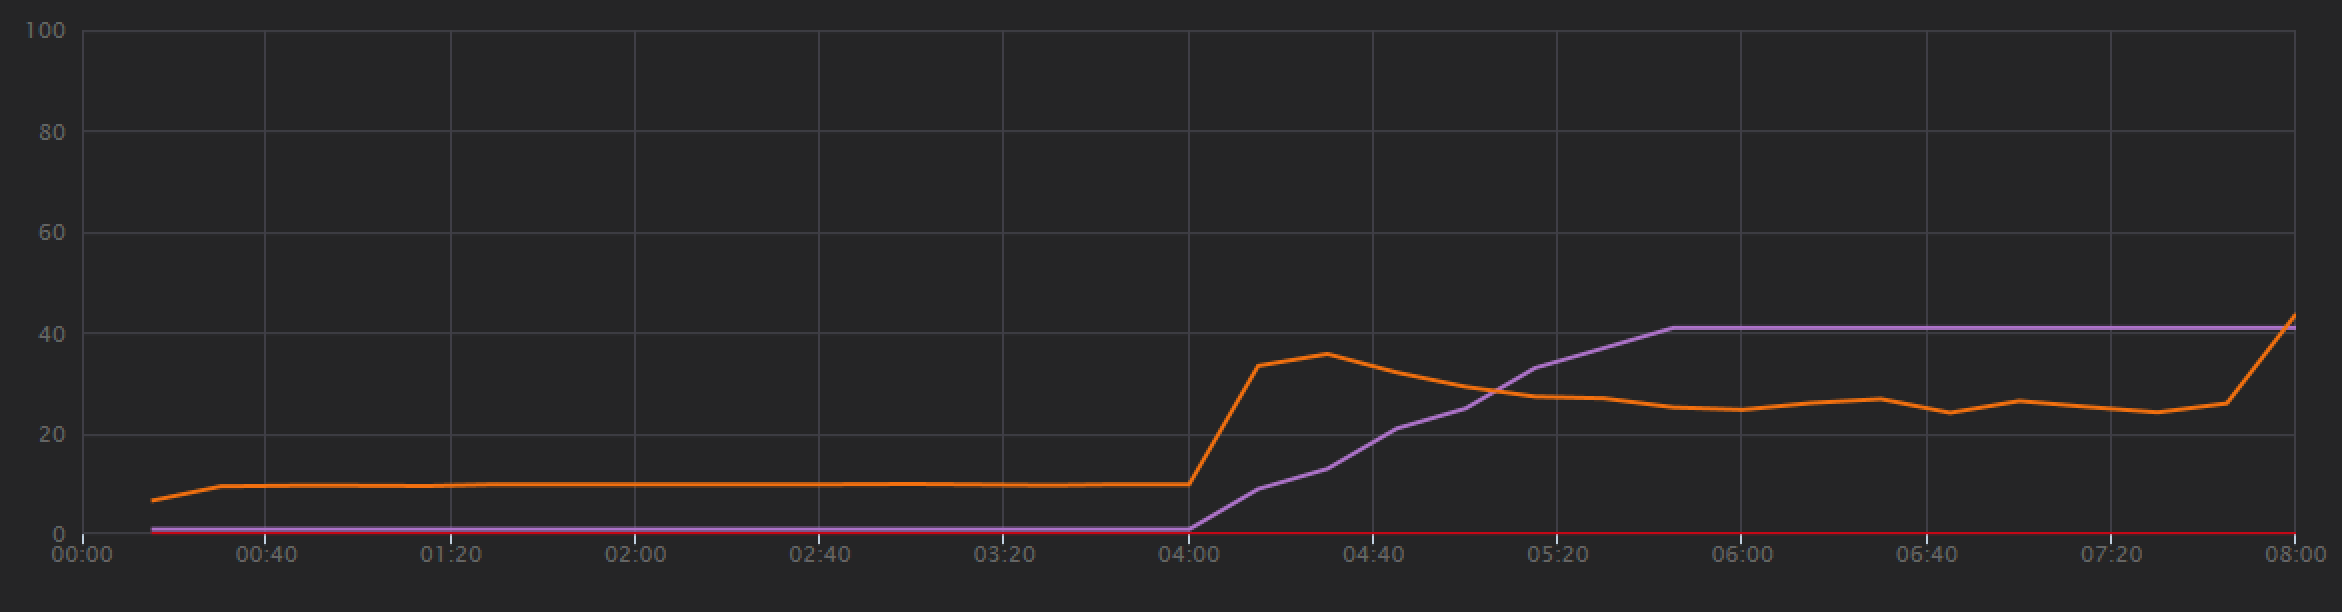 Graph of Visual Studio load test results